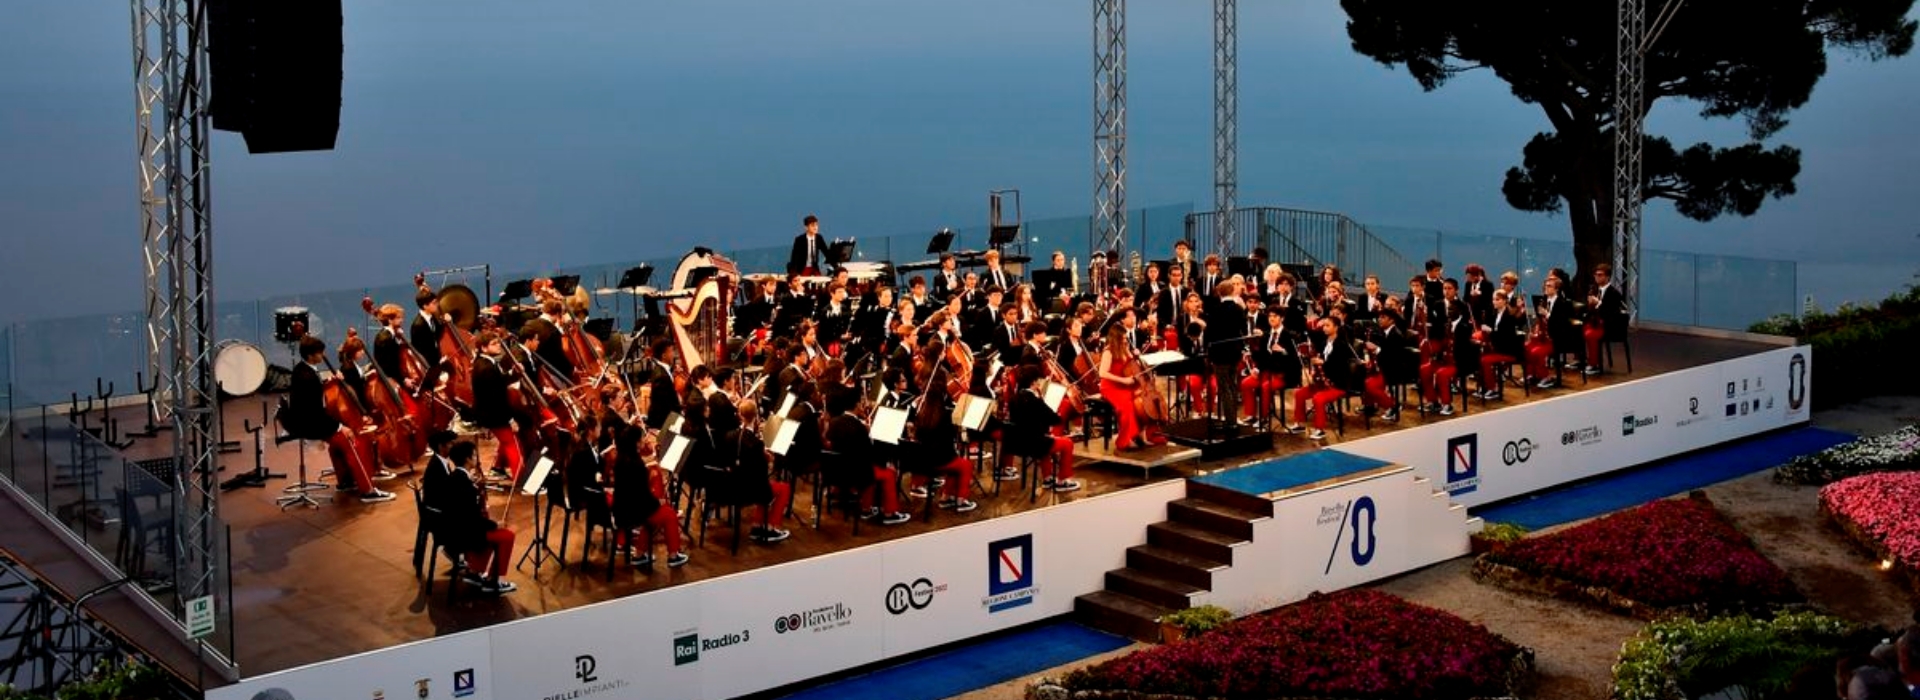 The Sunrise Concert at The Ravello Festival: The Ultimate August Morning